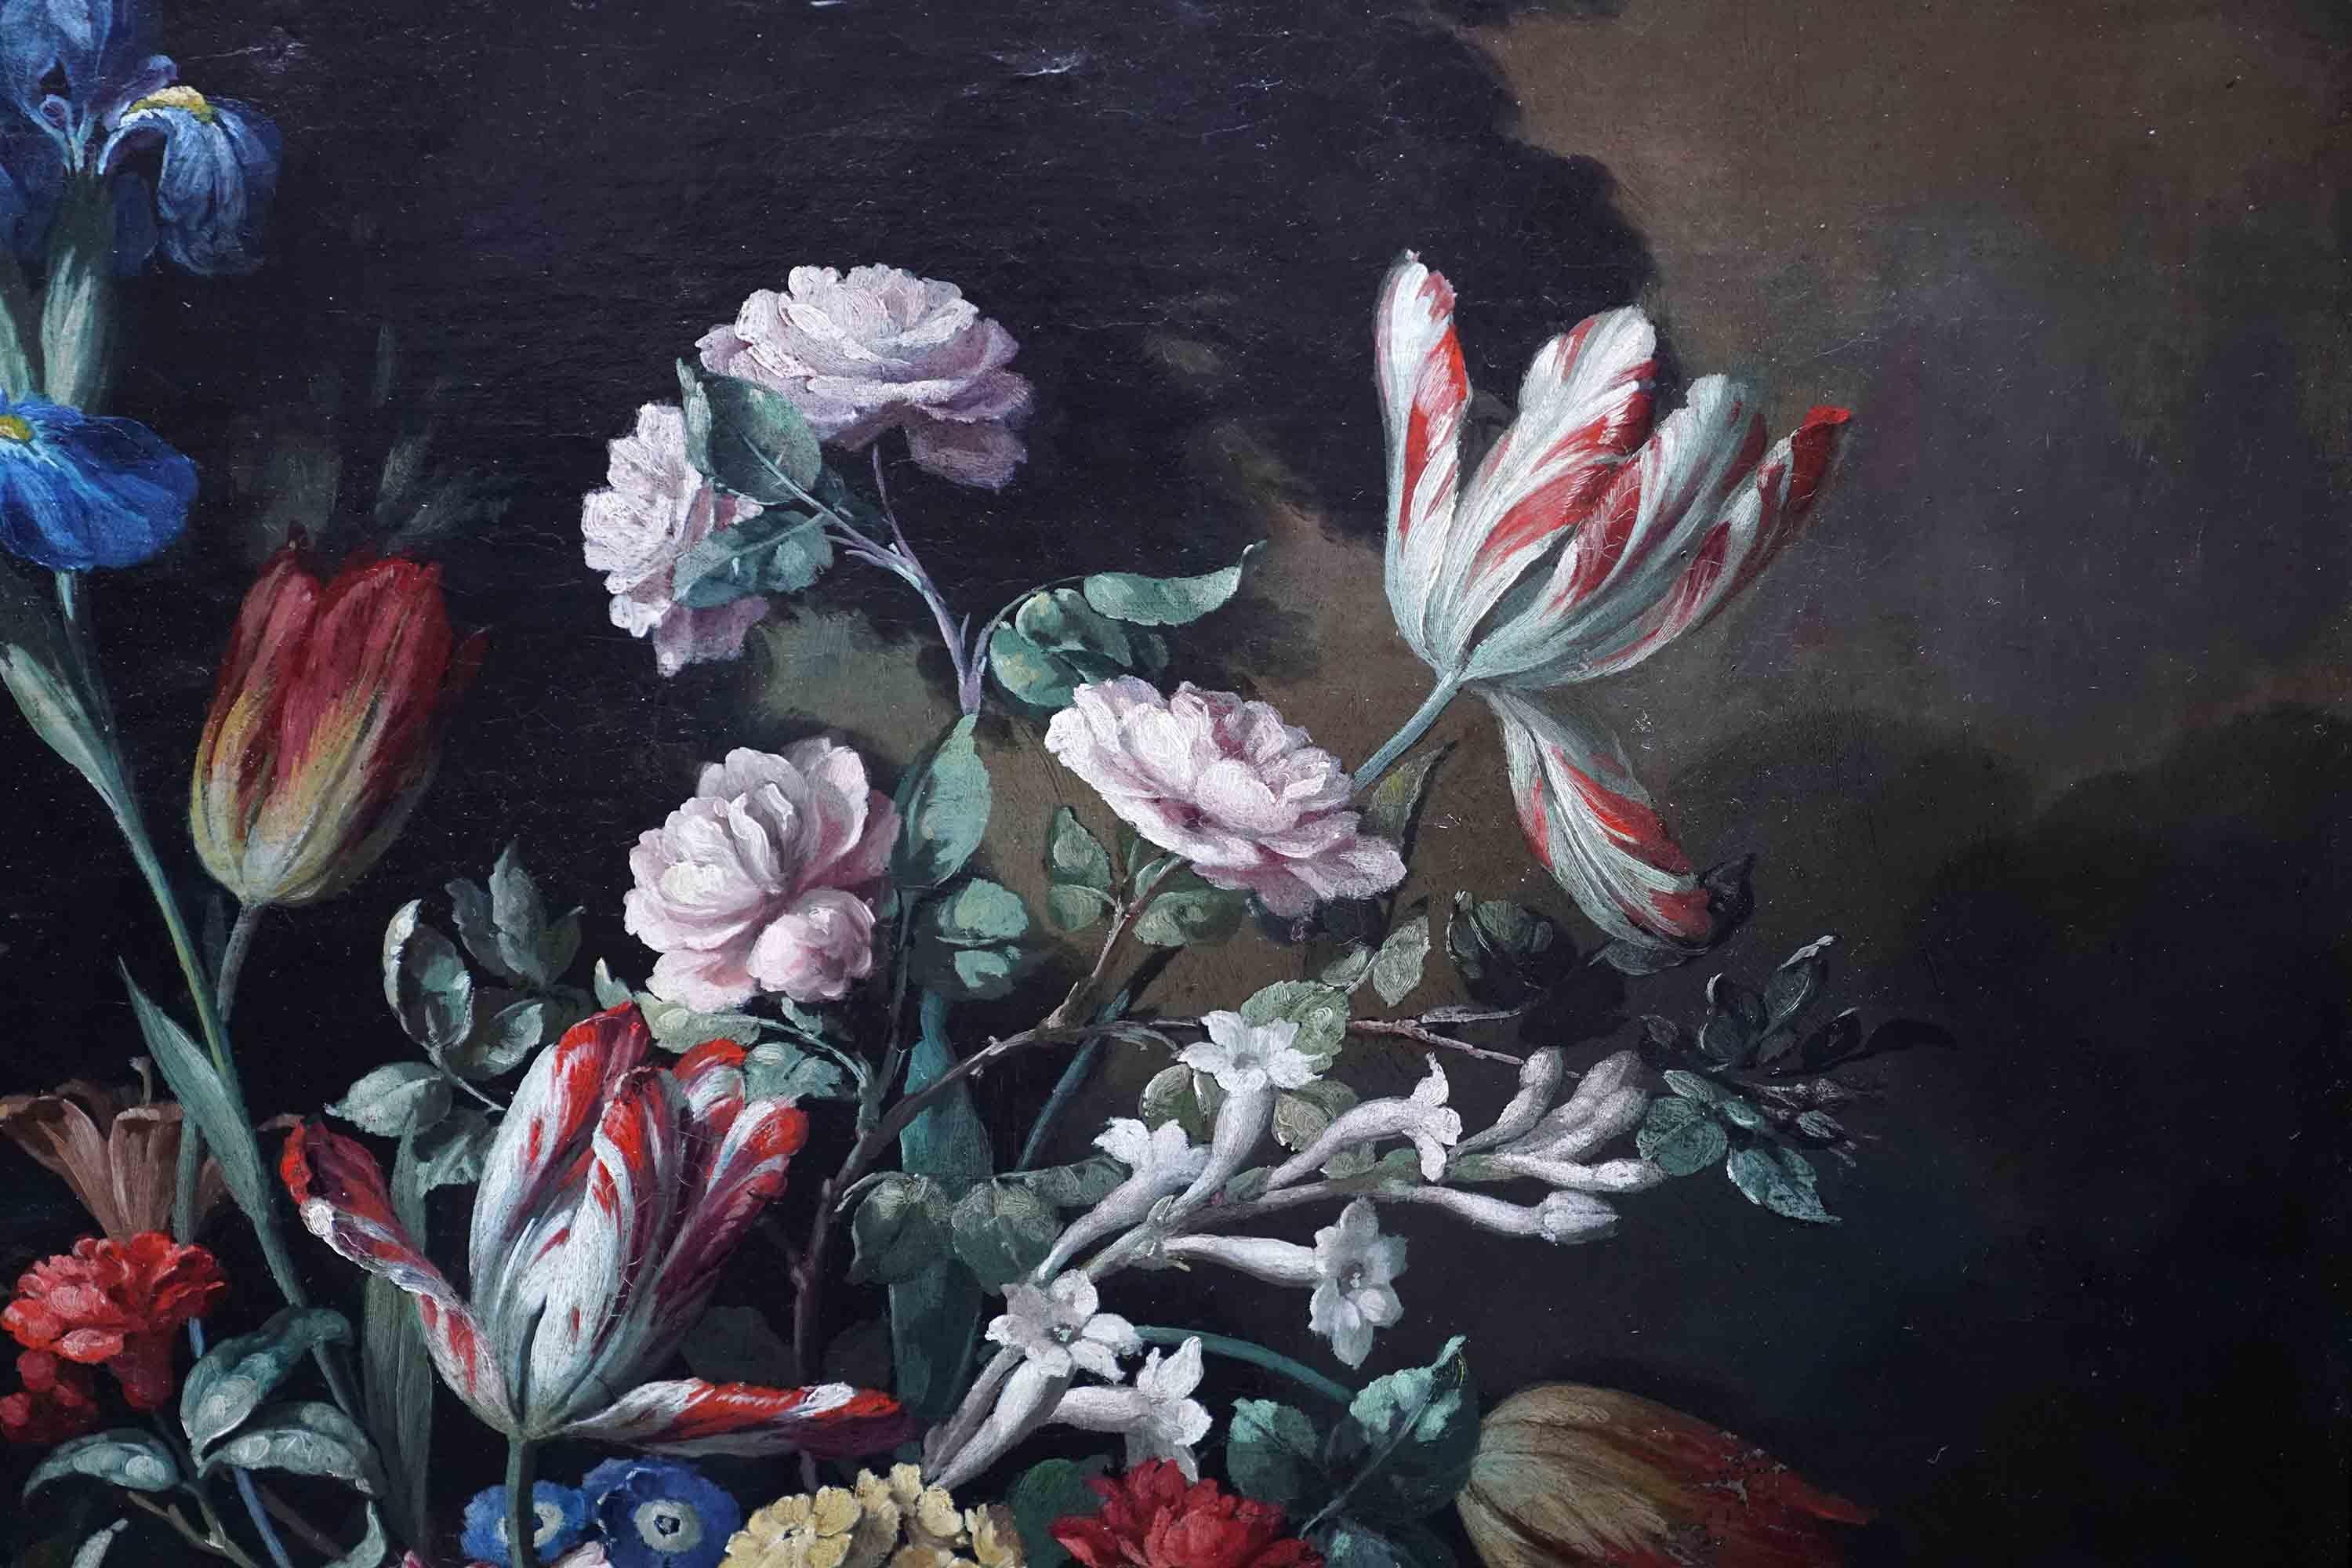 This superb vibrant Dutch 18th century Old Master floral oil painting is attributed to circle of Gerard Van Spaendonck. Painted circa 1790, it is a beautiful mixed floral still life flower arrangement in an ornate urn on a marble ledge against a